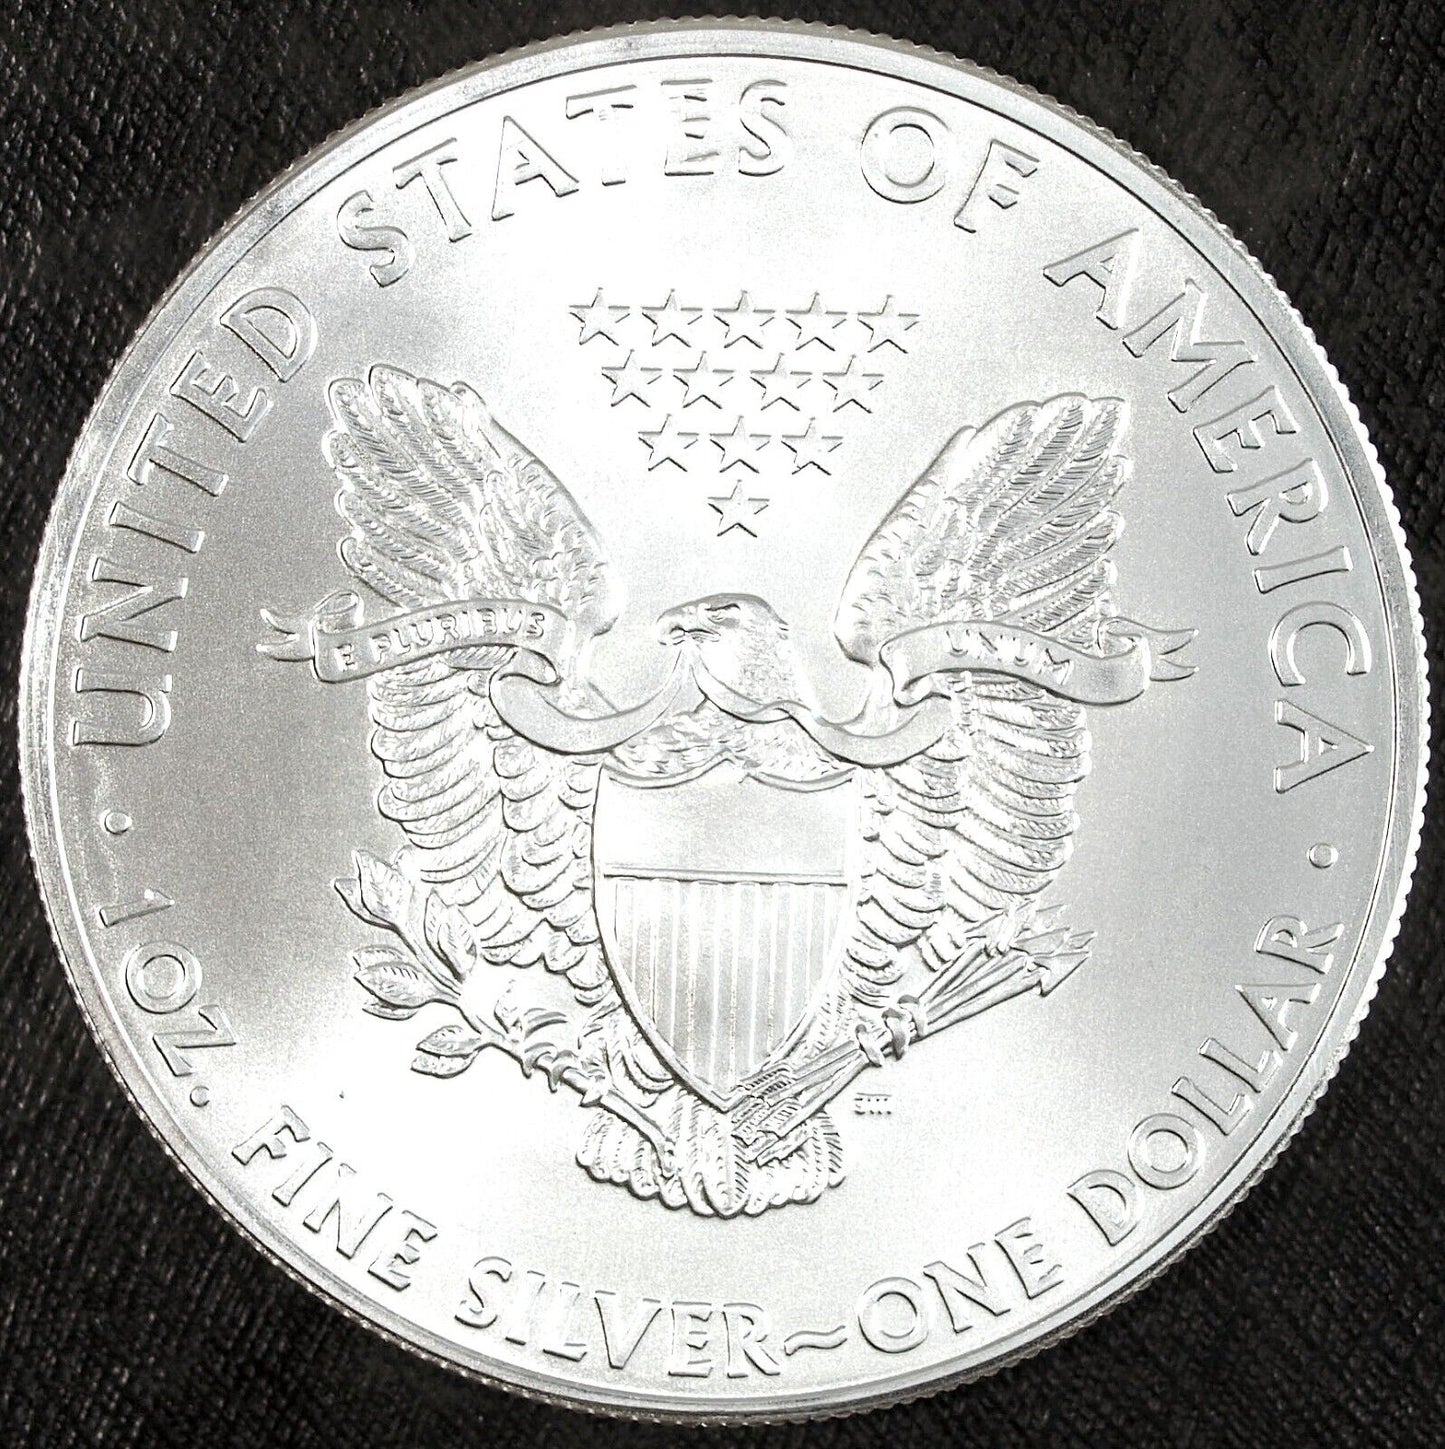 2015 U.S. Mint American Silver Eagle ☆☆ Uncirculated ☆☆ Great Collectible 129